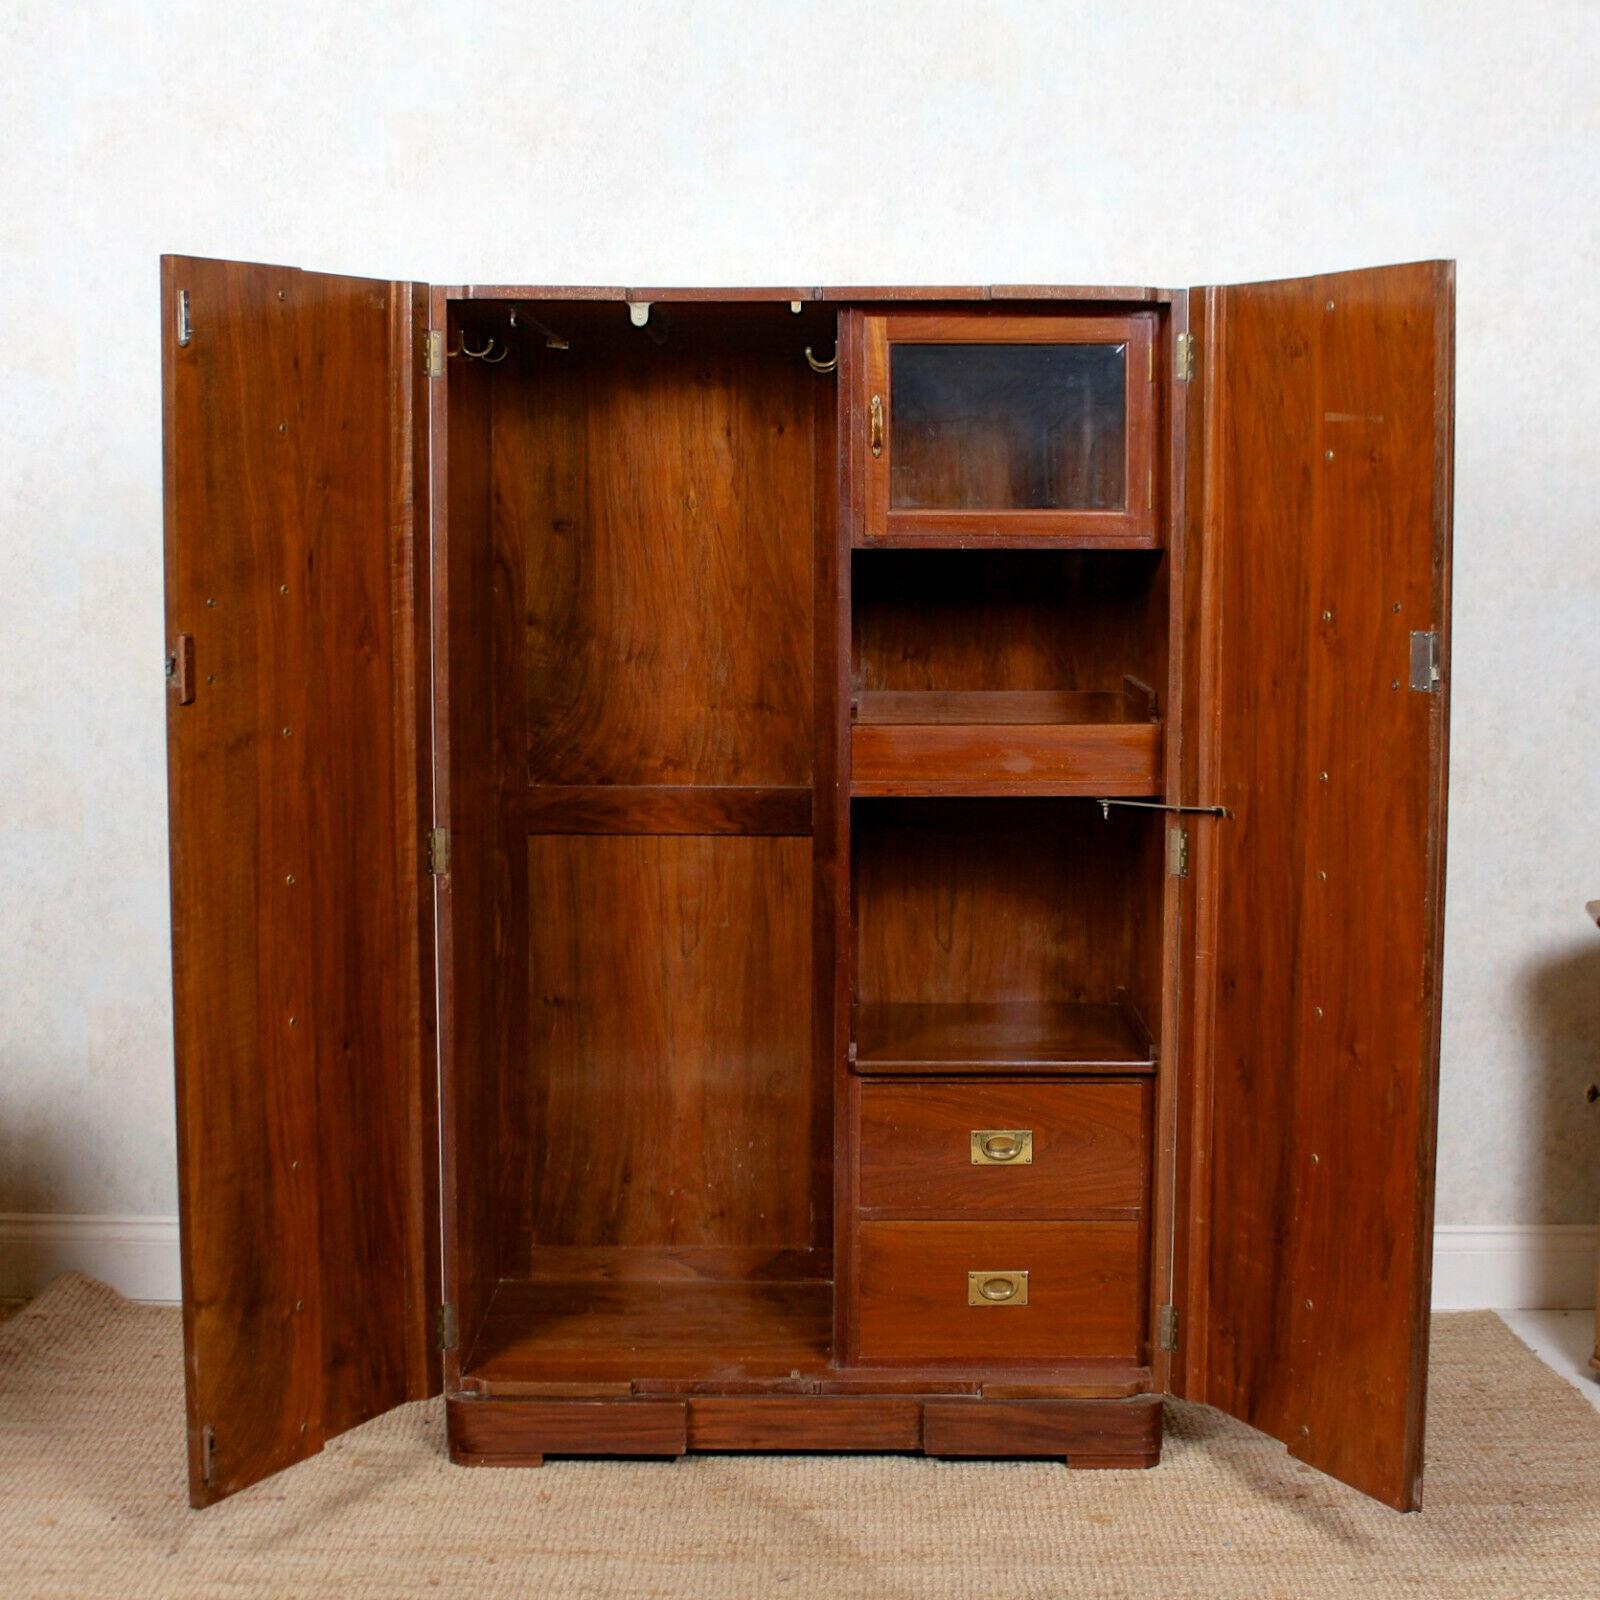 A fine quality Art Deco bird’s-eye maple compactum wardrobe.
The inlaid doors mounted with good handles and enclosed a fitted interior comprising hanging rail, hooks, shelving, glazed cupboard, tray and drawers mounted with good brass inset